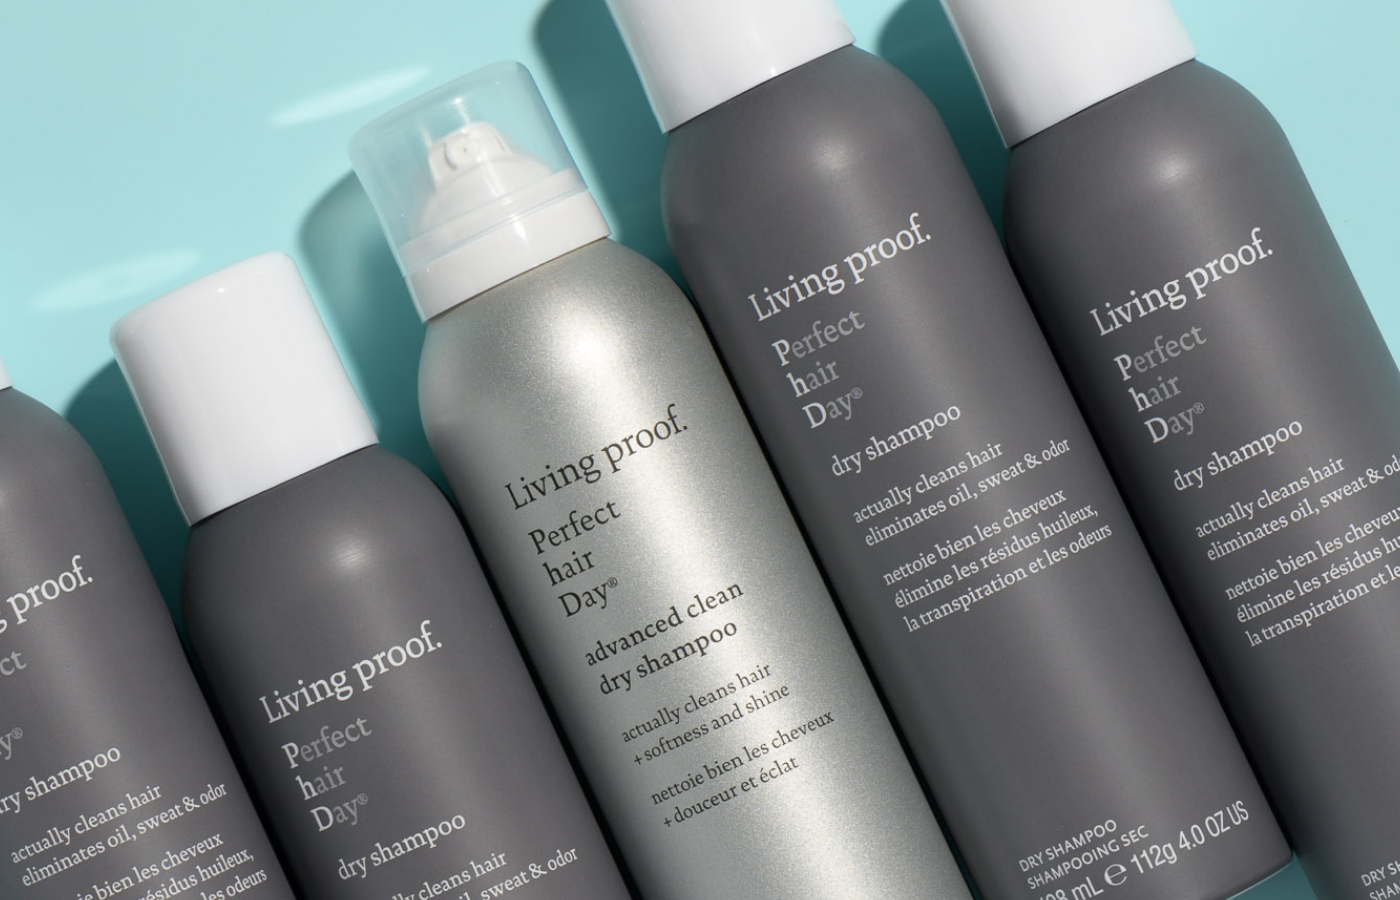 Living Proof Perfect Hair Day products.